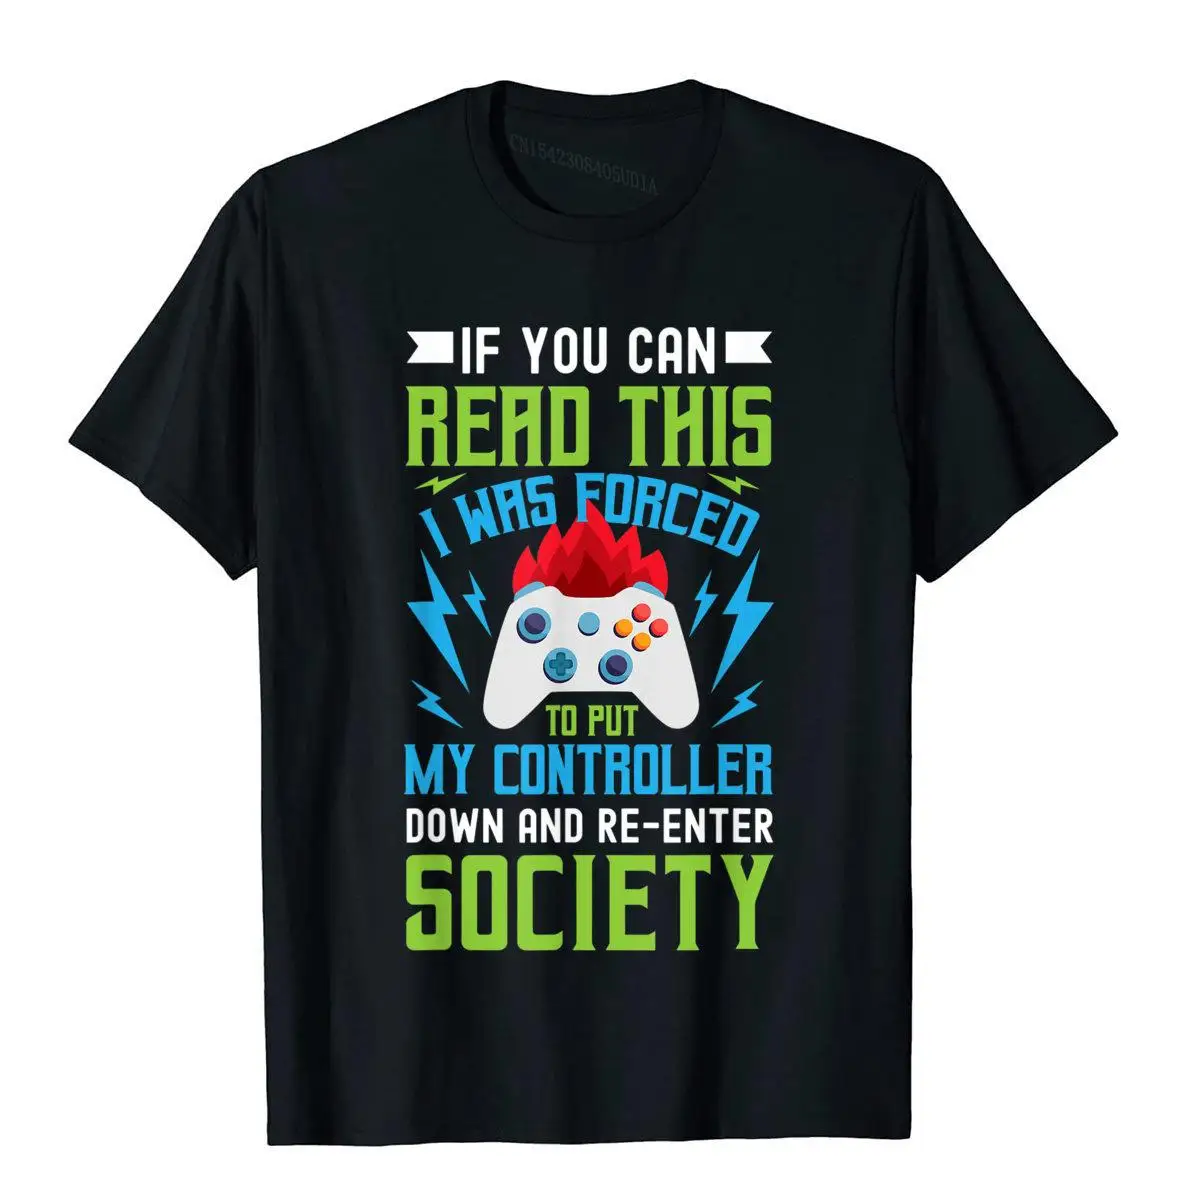 I Was Forced To Put My Controller Down Funny Gaming T-Shirt__A11057black